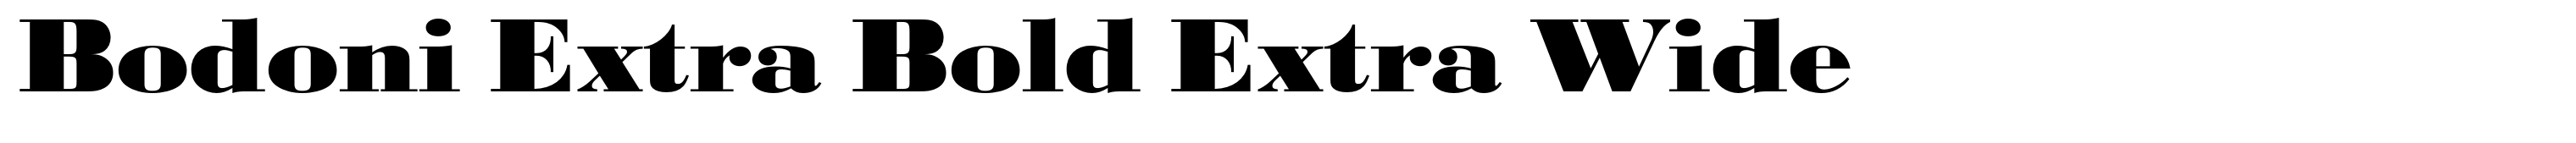 Bodoni Extra Bold Extra Wide